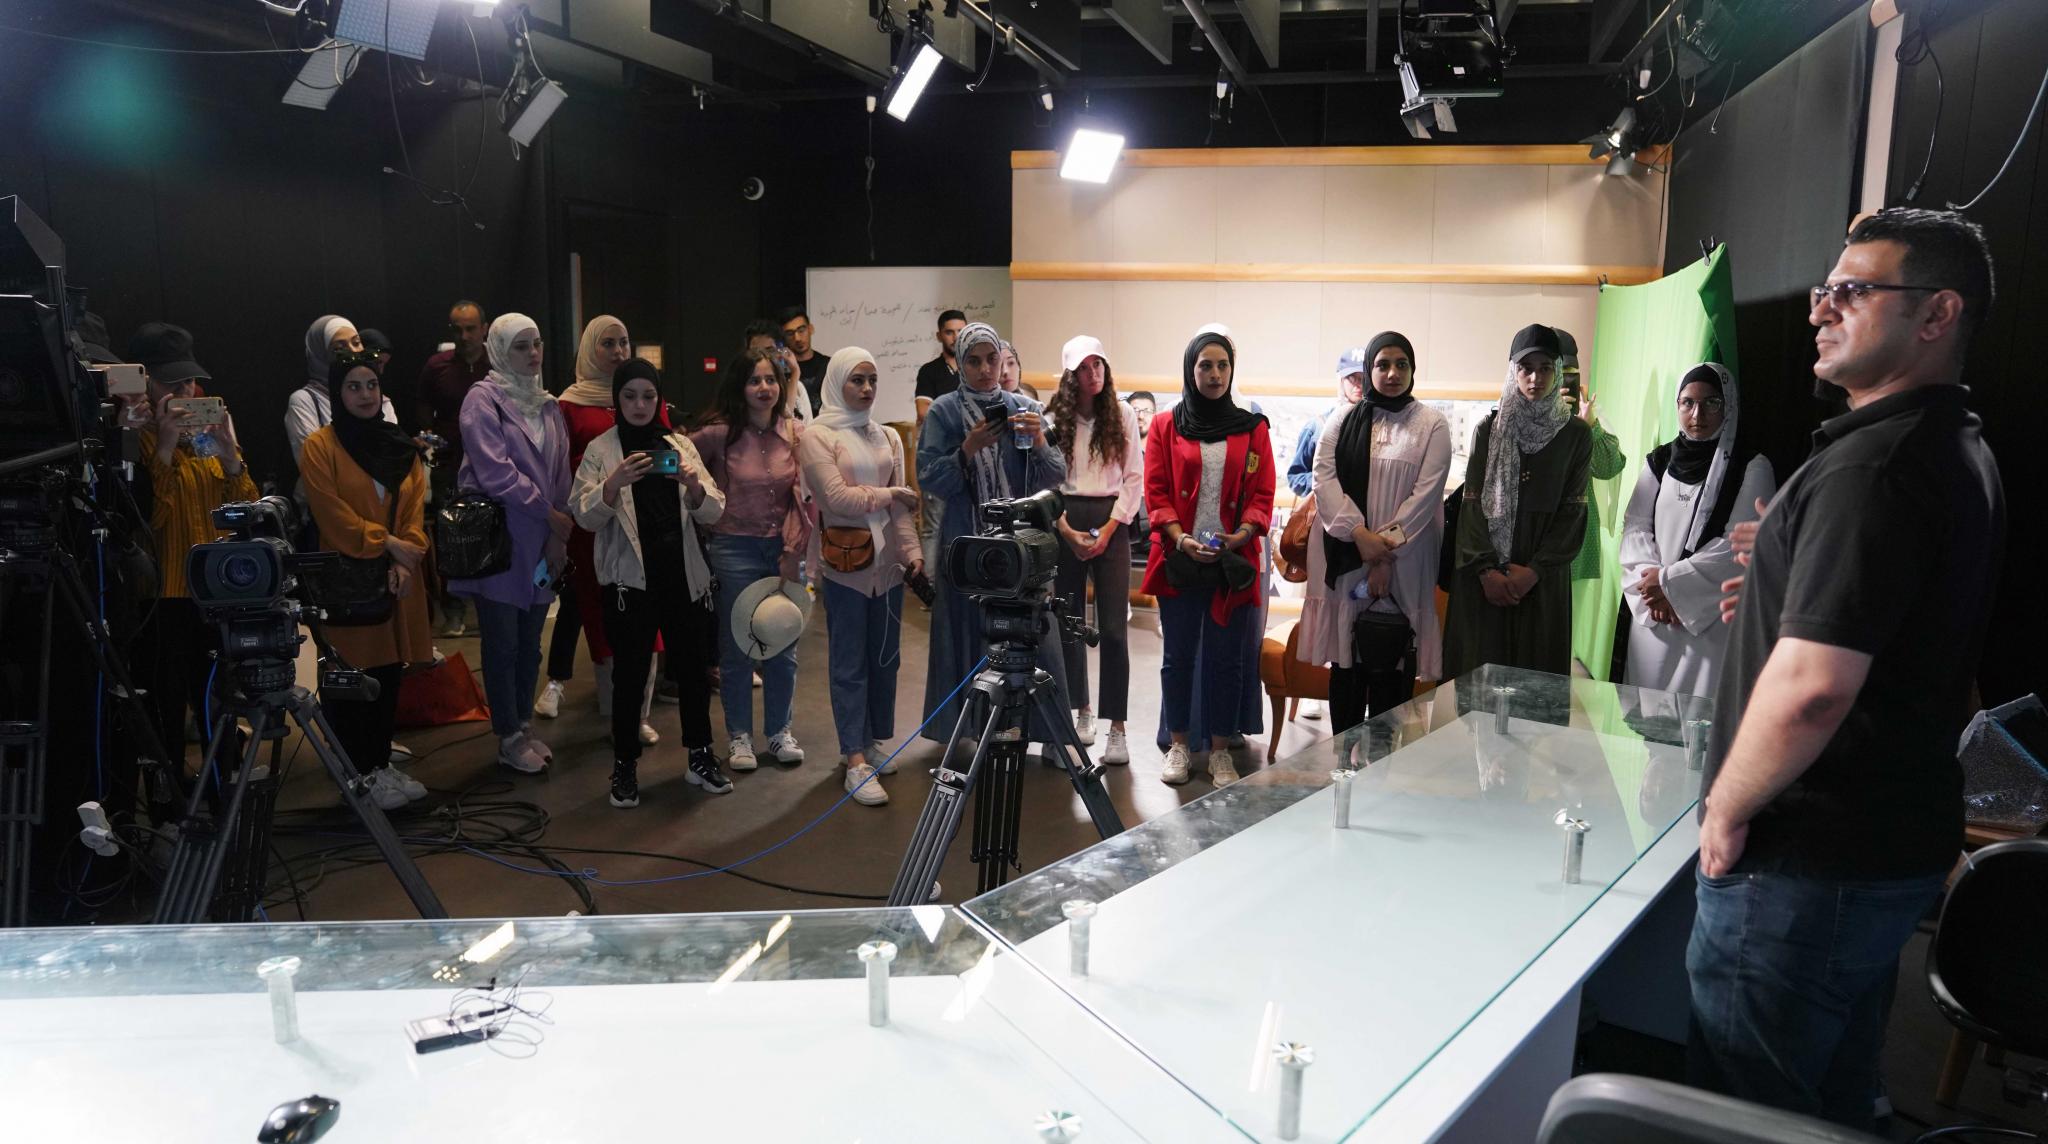 From Asdaa’ News Organization, a Youth Journalists Delegation Visits AAUP